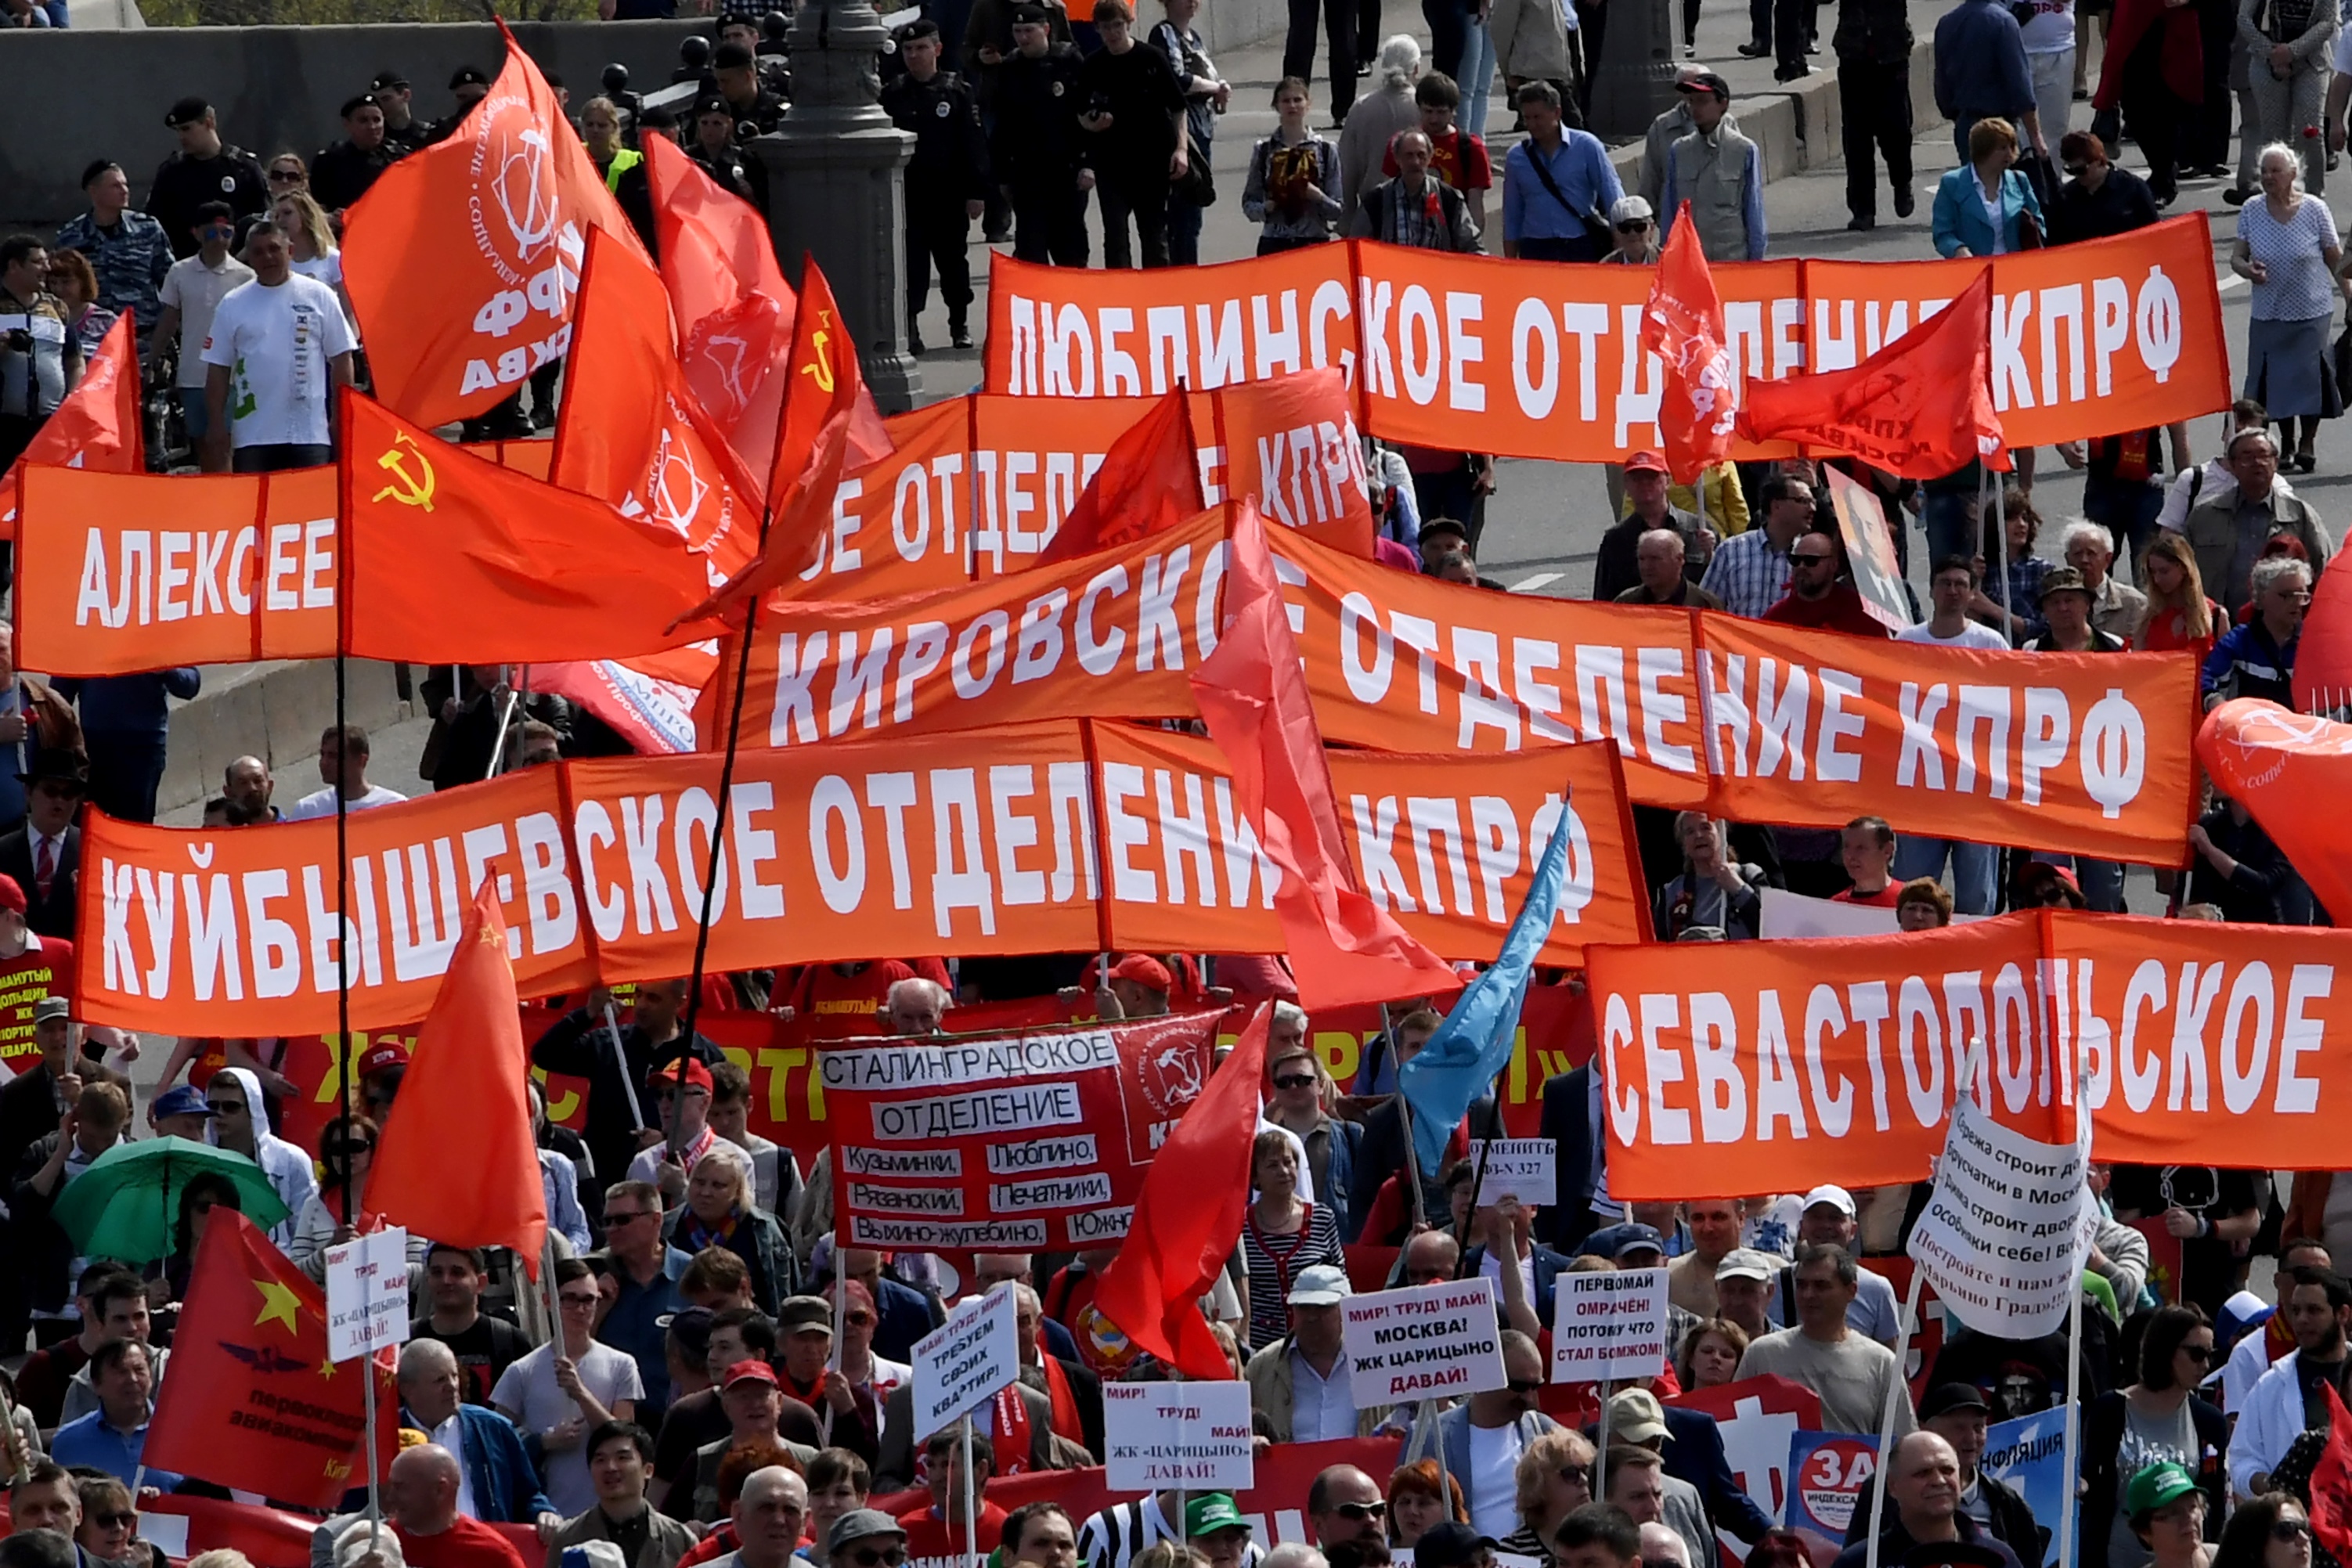 Russian Communist party supporters take part in the traditional May Day rally in central Moscow on May 1, 2017.  / AFP PHOTO / Kirill KUDRYAVTSEV